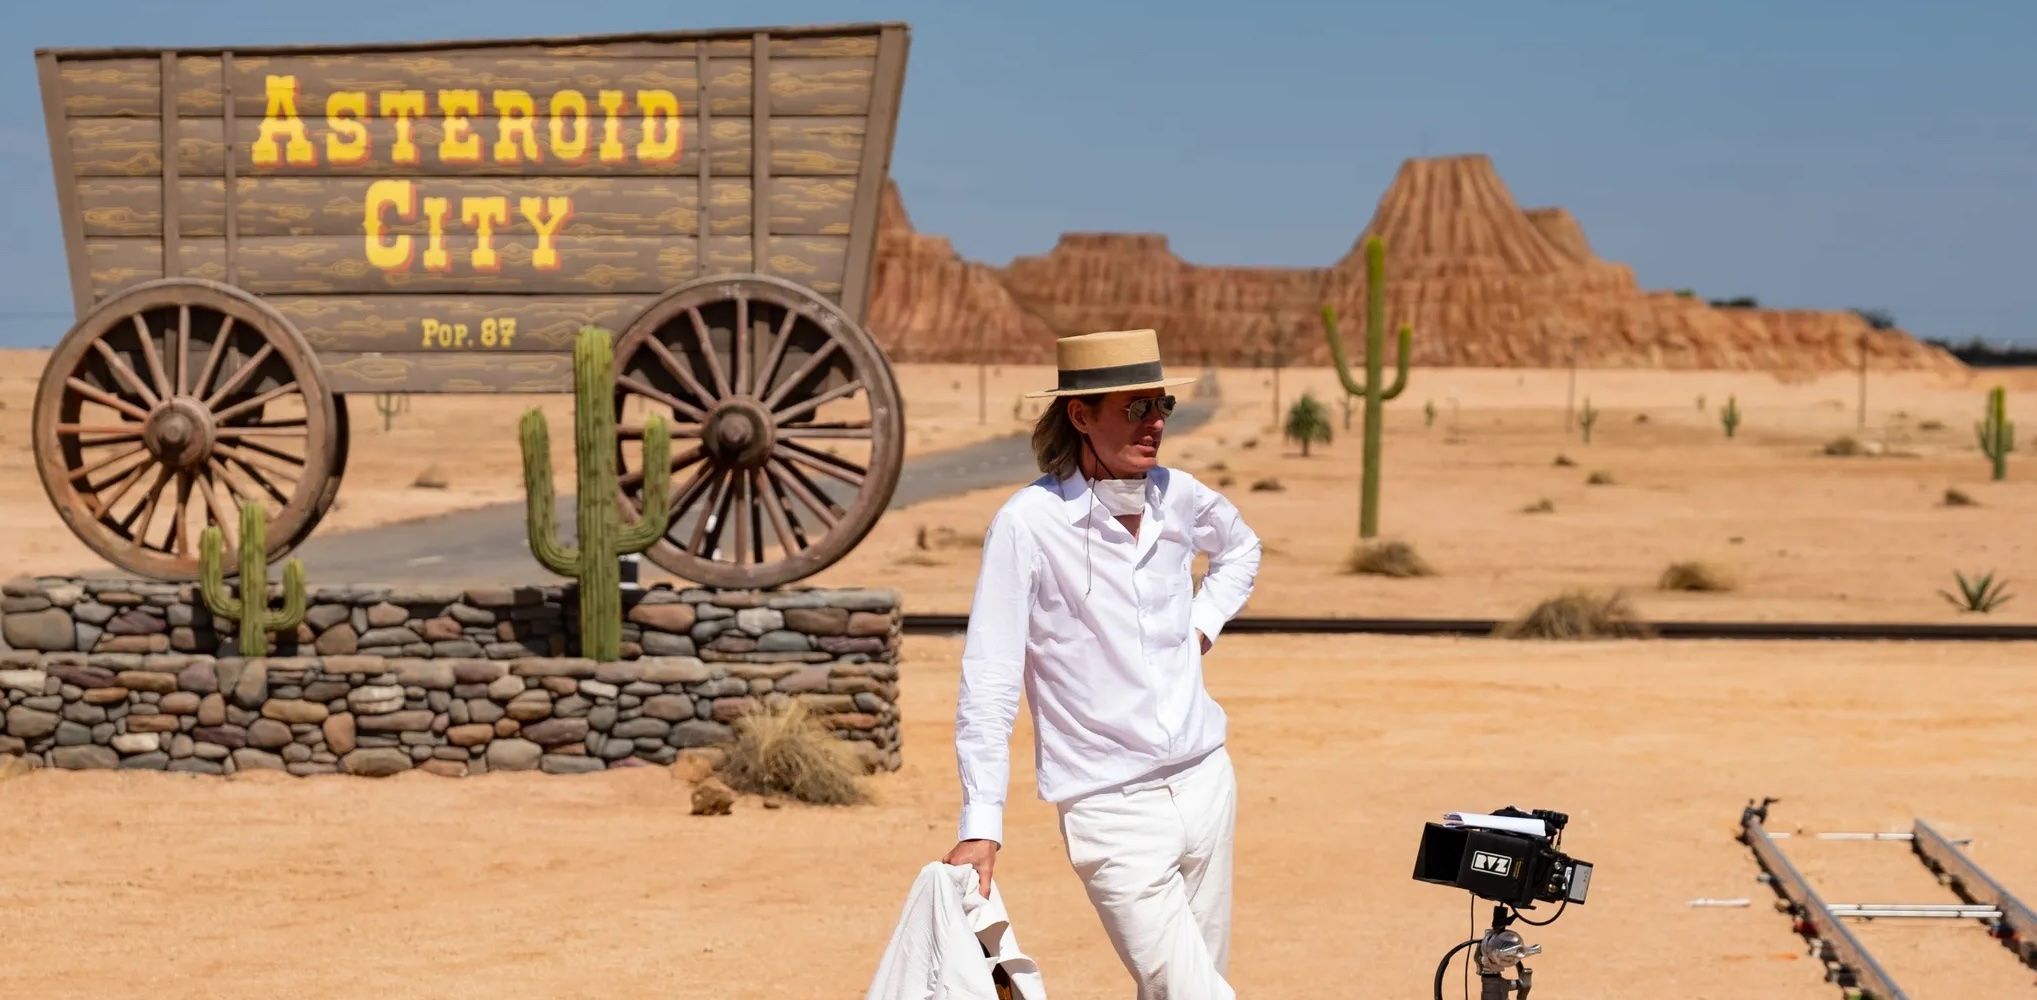 A photo of Wes Anderson in front of a wagon in the desert on the set of Asteroid City.